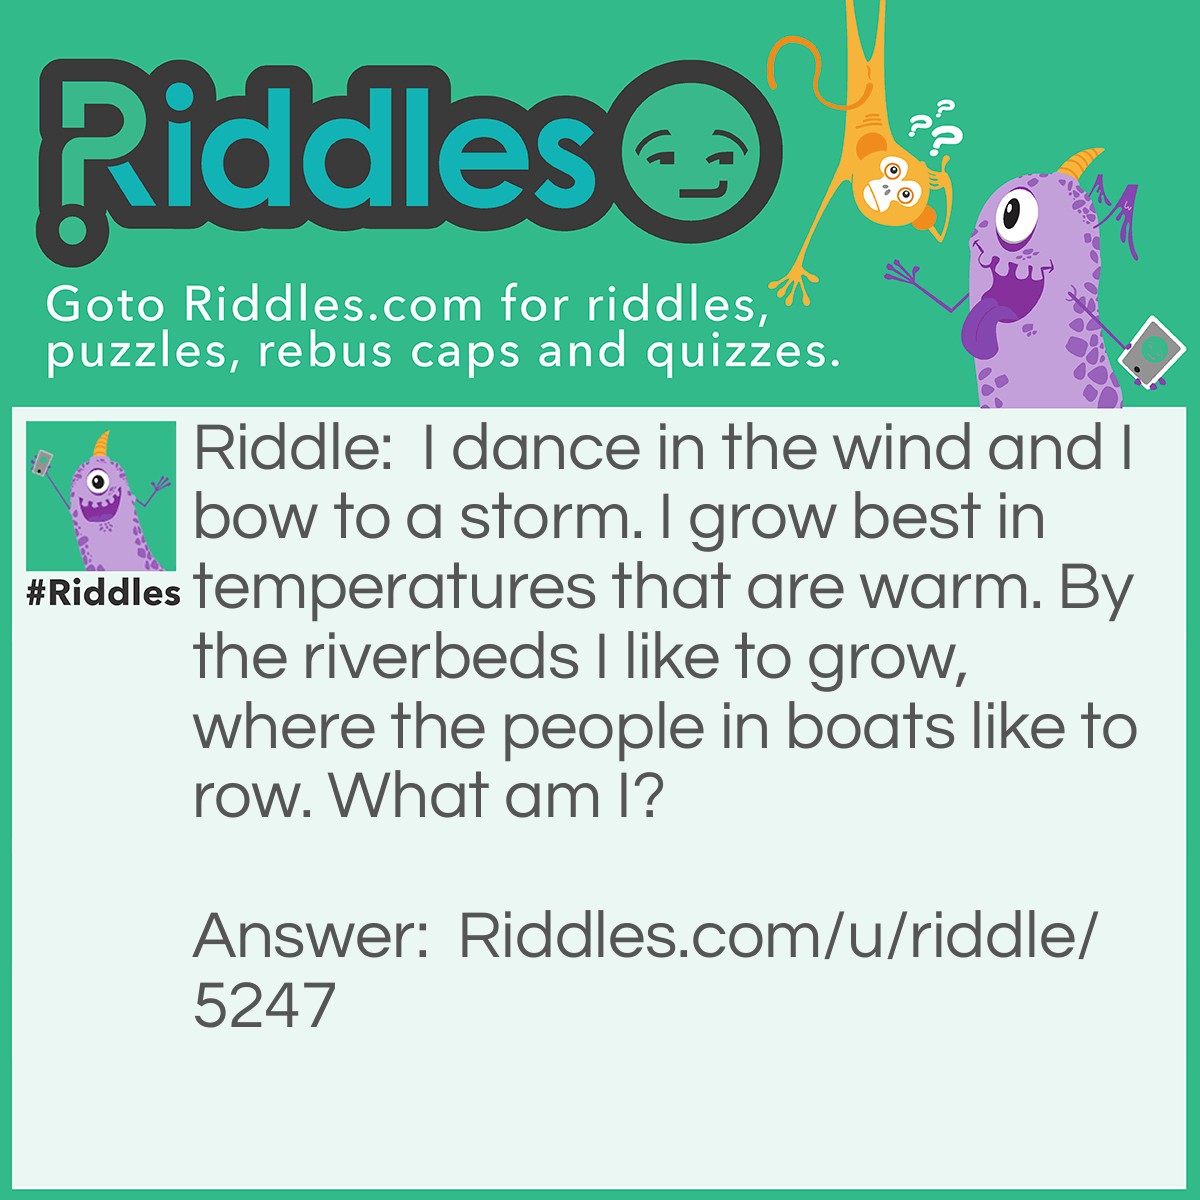 Riddle: I dance in the wind and I bow to a storm. I grow best in temperatures that are warm. By the riverbeds I like to grow, where the people in boats like to row. What am I? Answer: A river reed. Didn't guess it did you?